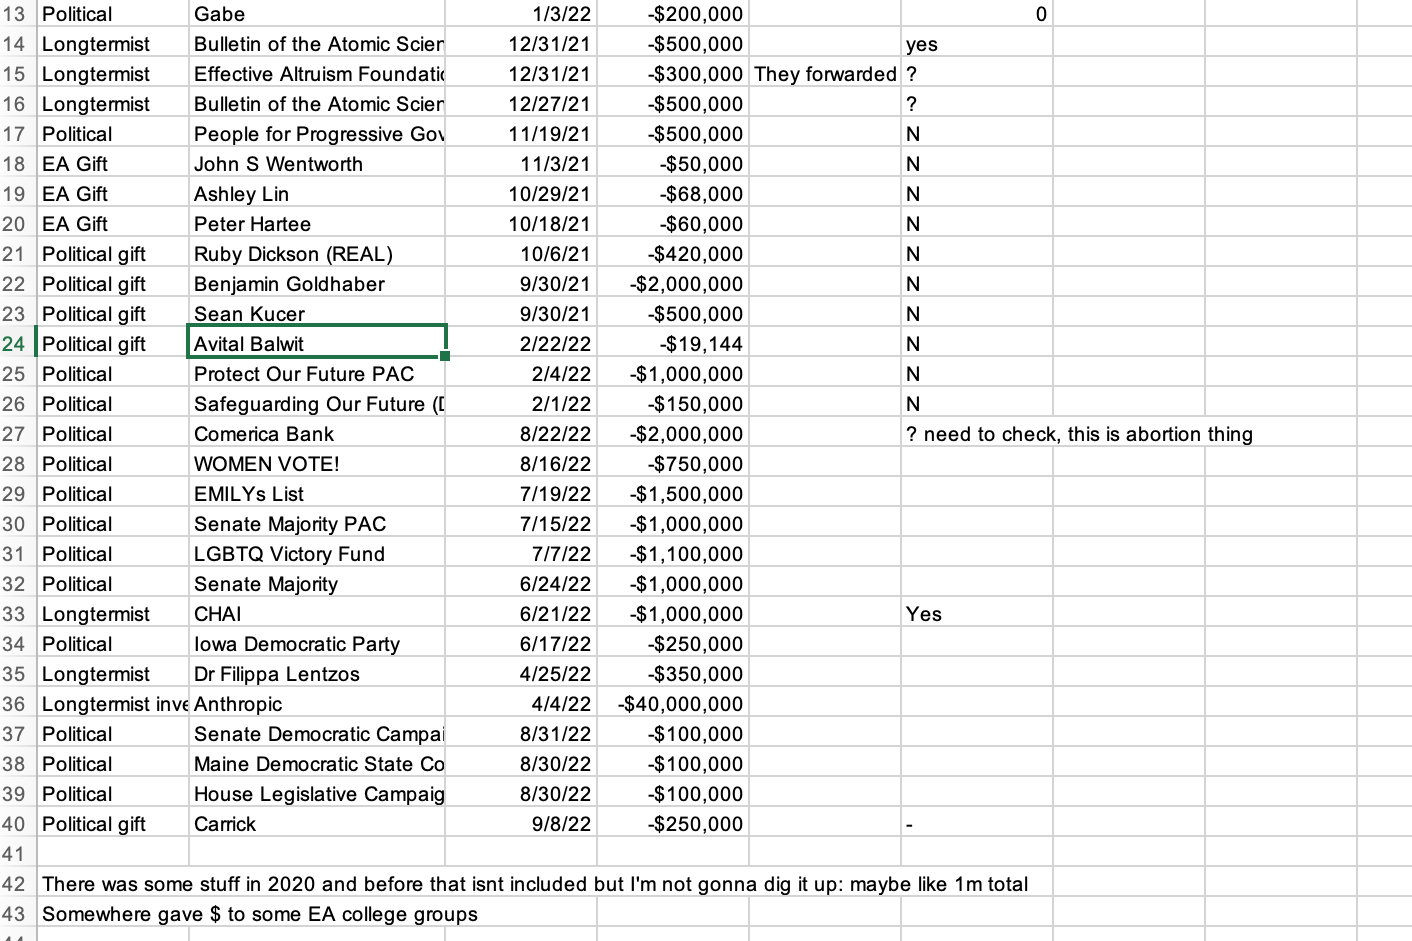 A portion of an Excel spreadsheet tabulating various monetary “gifts” made under Nishad Singh’s name throughout 2022, with recipients like Gabe Bankman-Fried, the Effective Altruism Foundation, Ashley Lin, Avital Balwit, Protect Our Future, Anthropic, and Carrick Flynn.